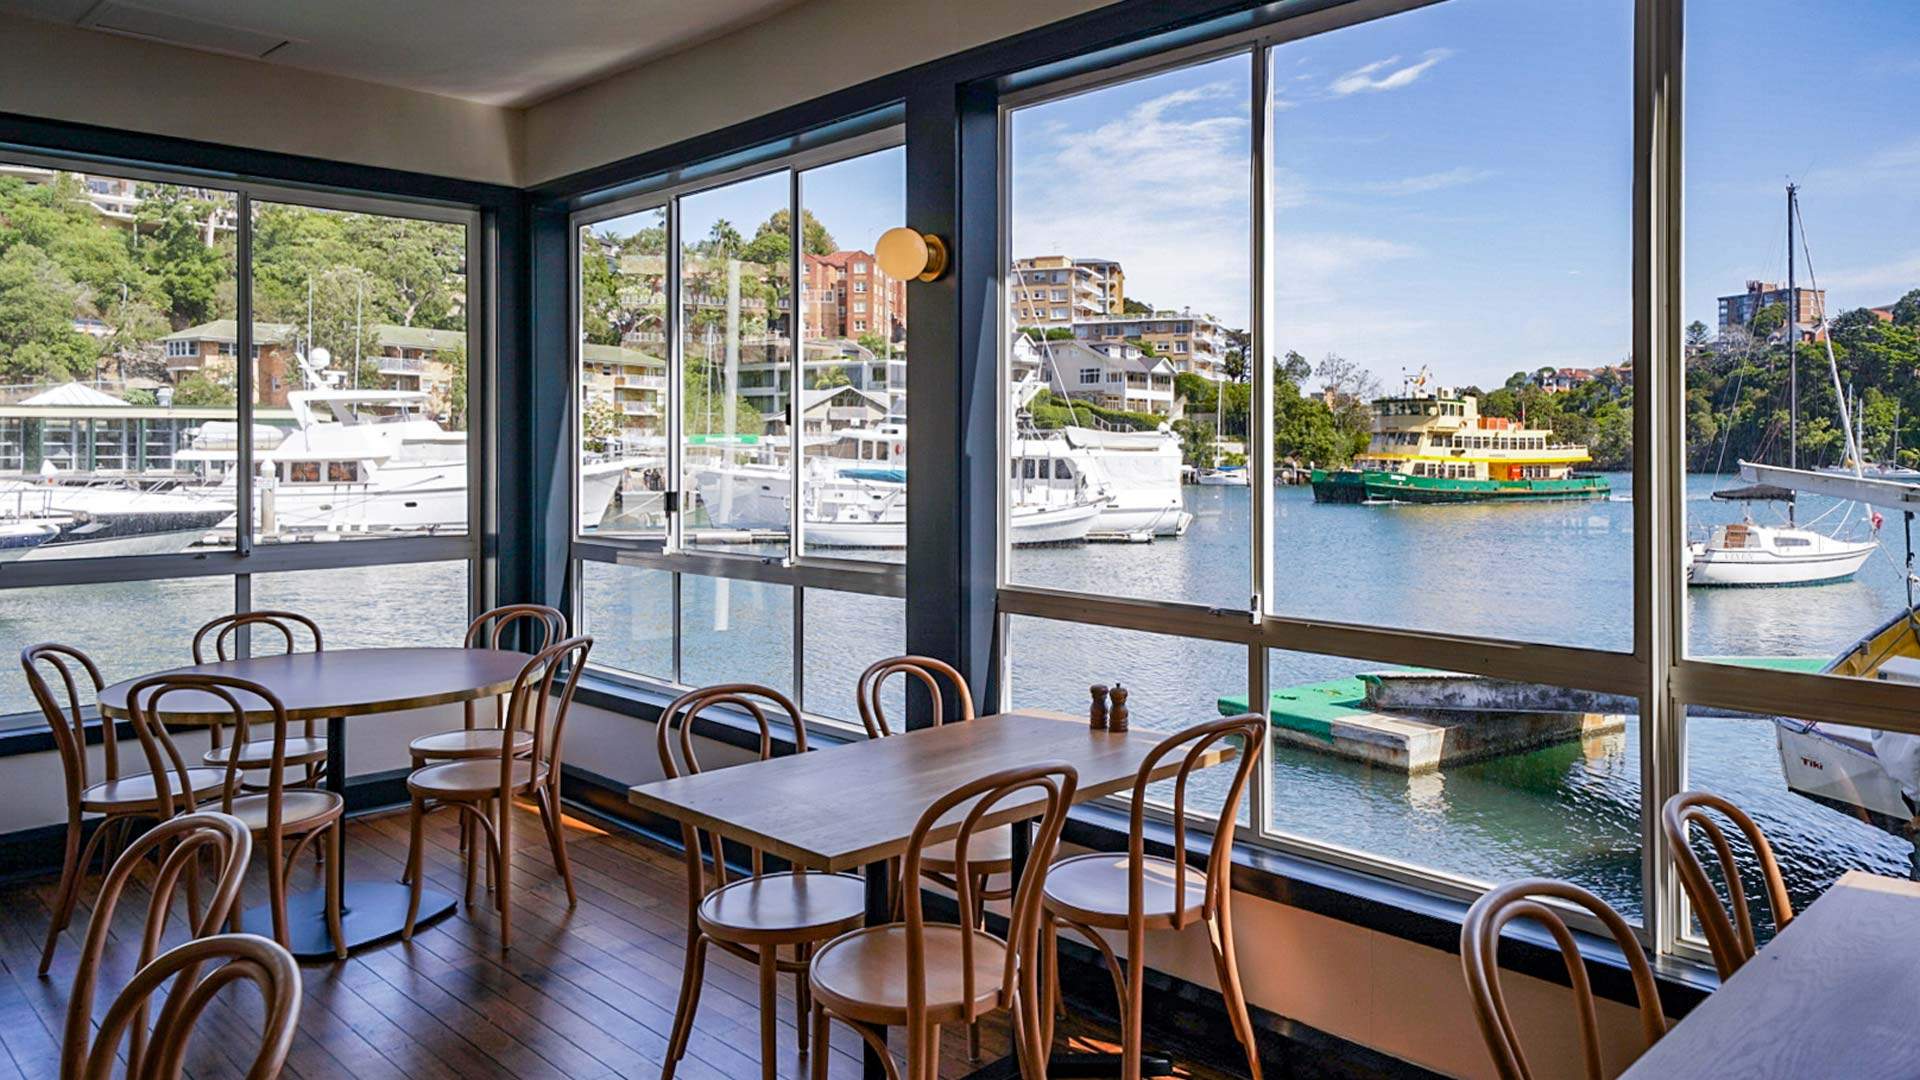 This Century-Old Lower North Shore Club Has Reopened with a New Cafe and  Bar - Concrete Playground